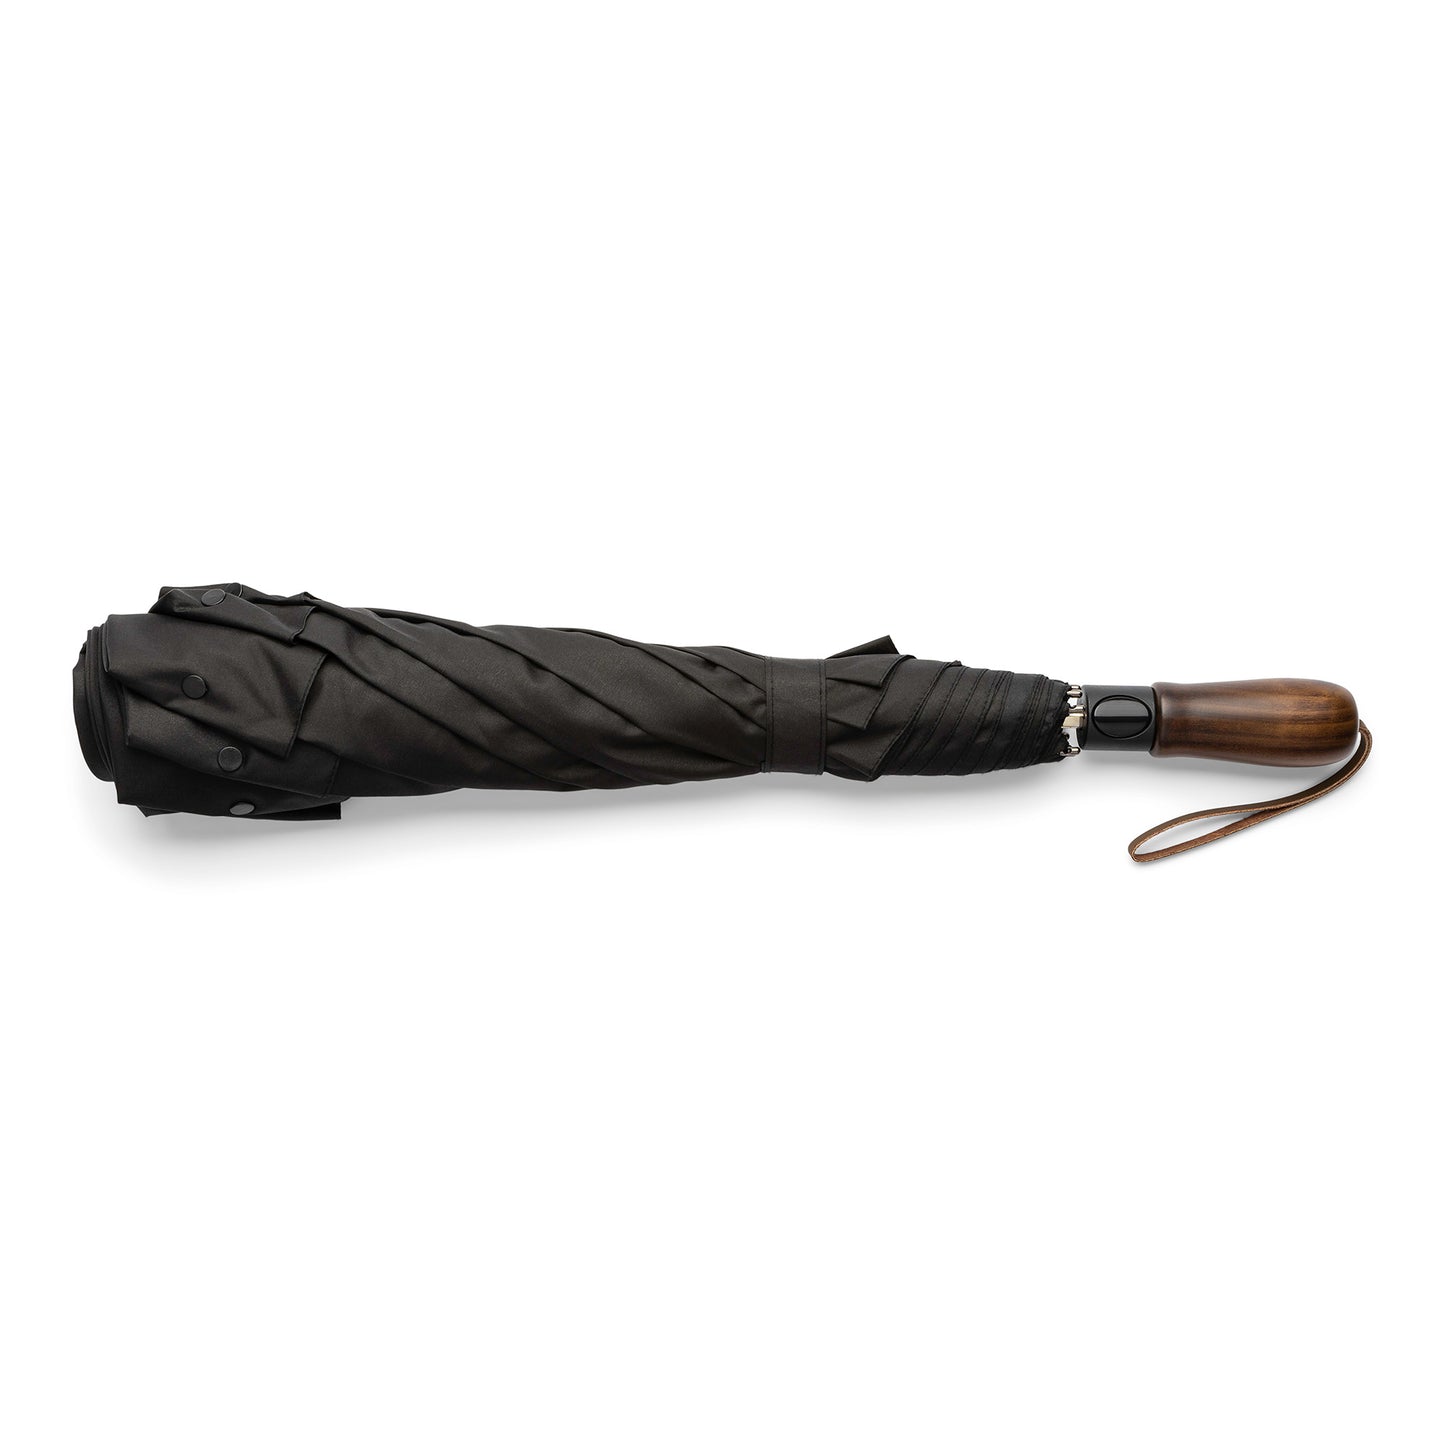 WindPro® Vented Auto Open 58" Arc Jumbo Compact Umbrella with Ergonomic Wood Grip and Shoulder Strap